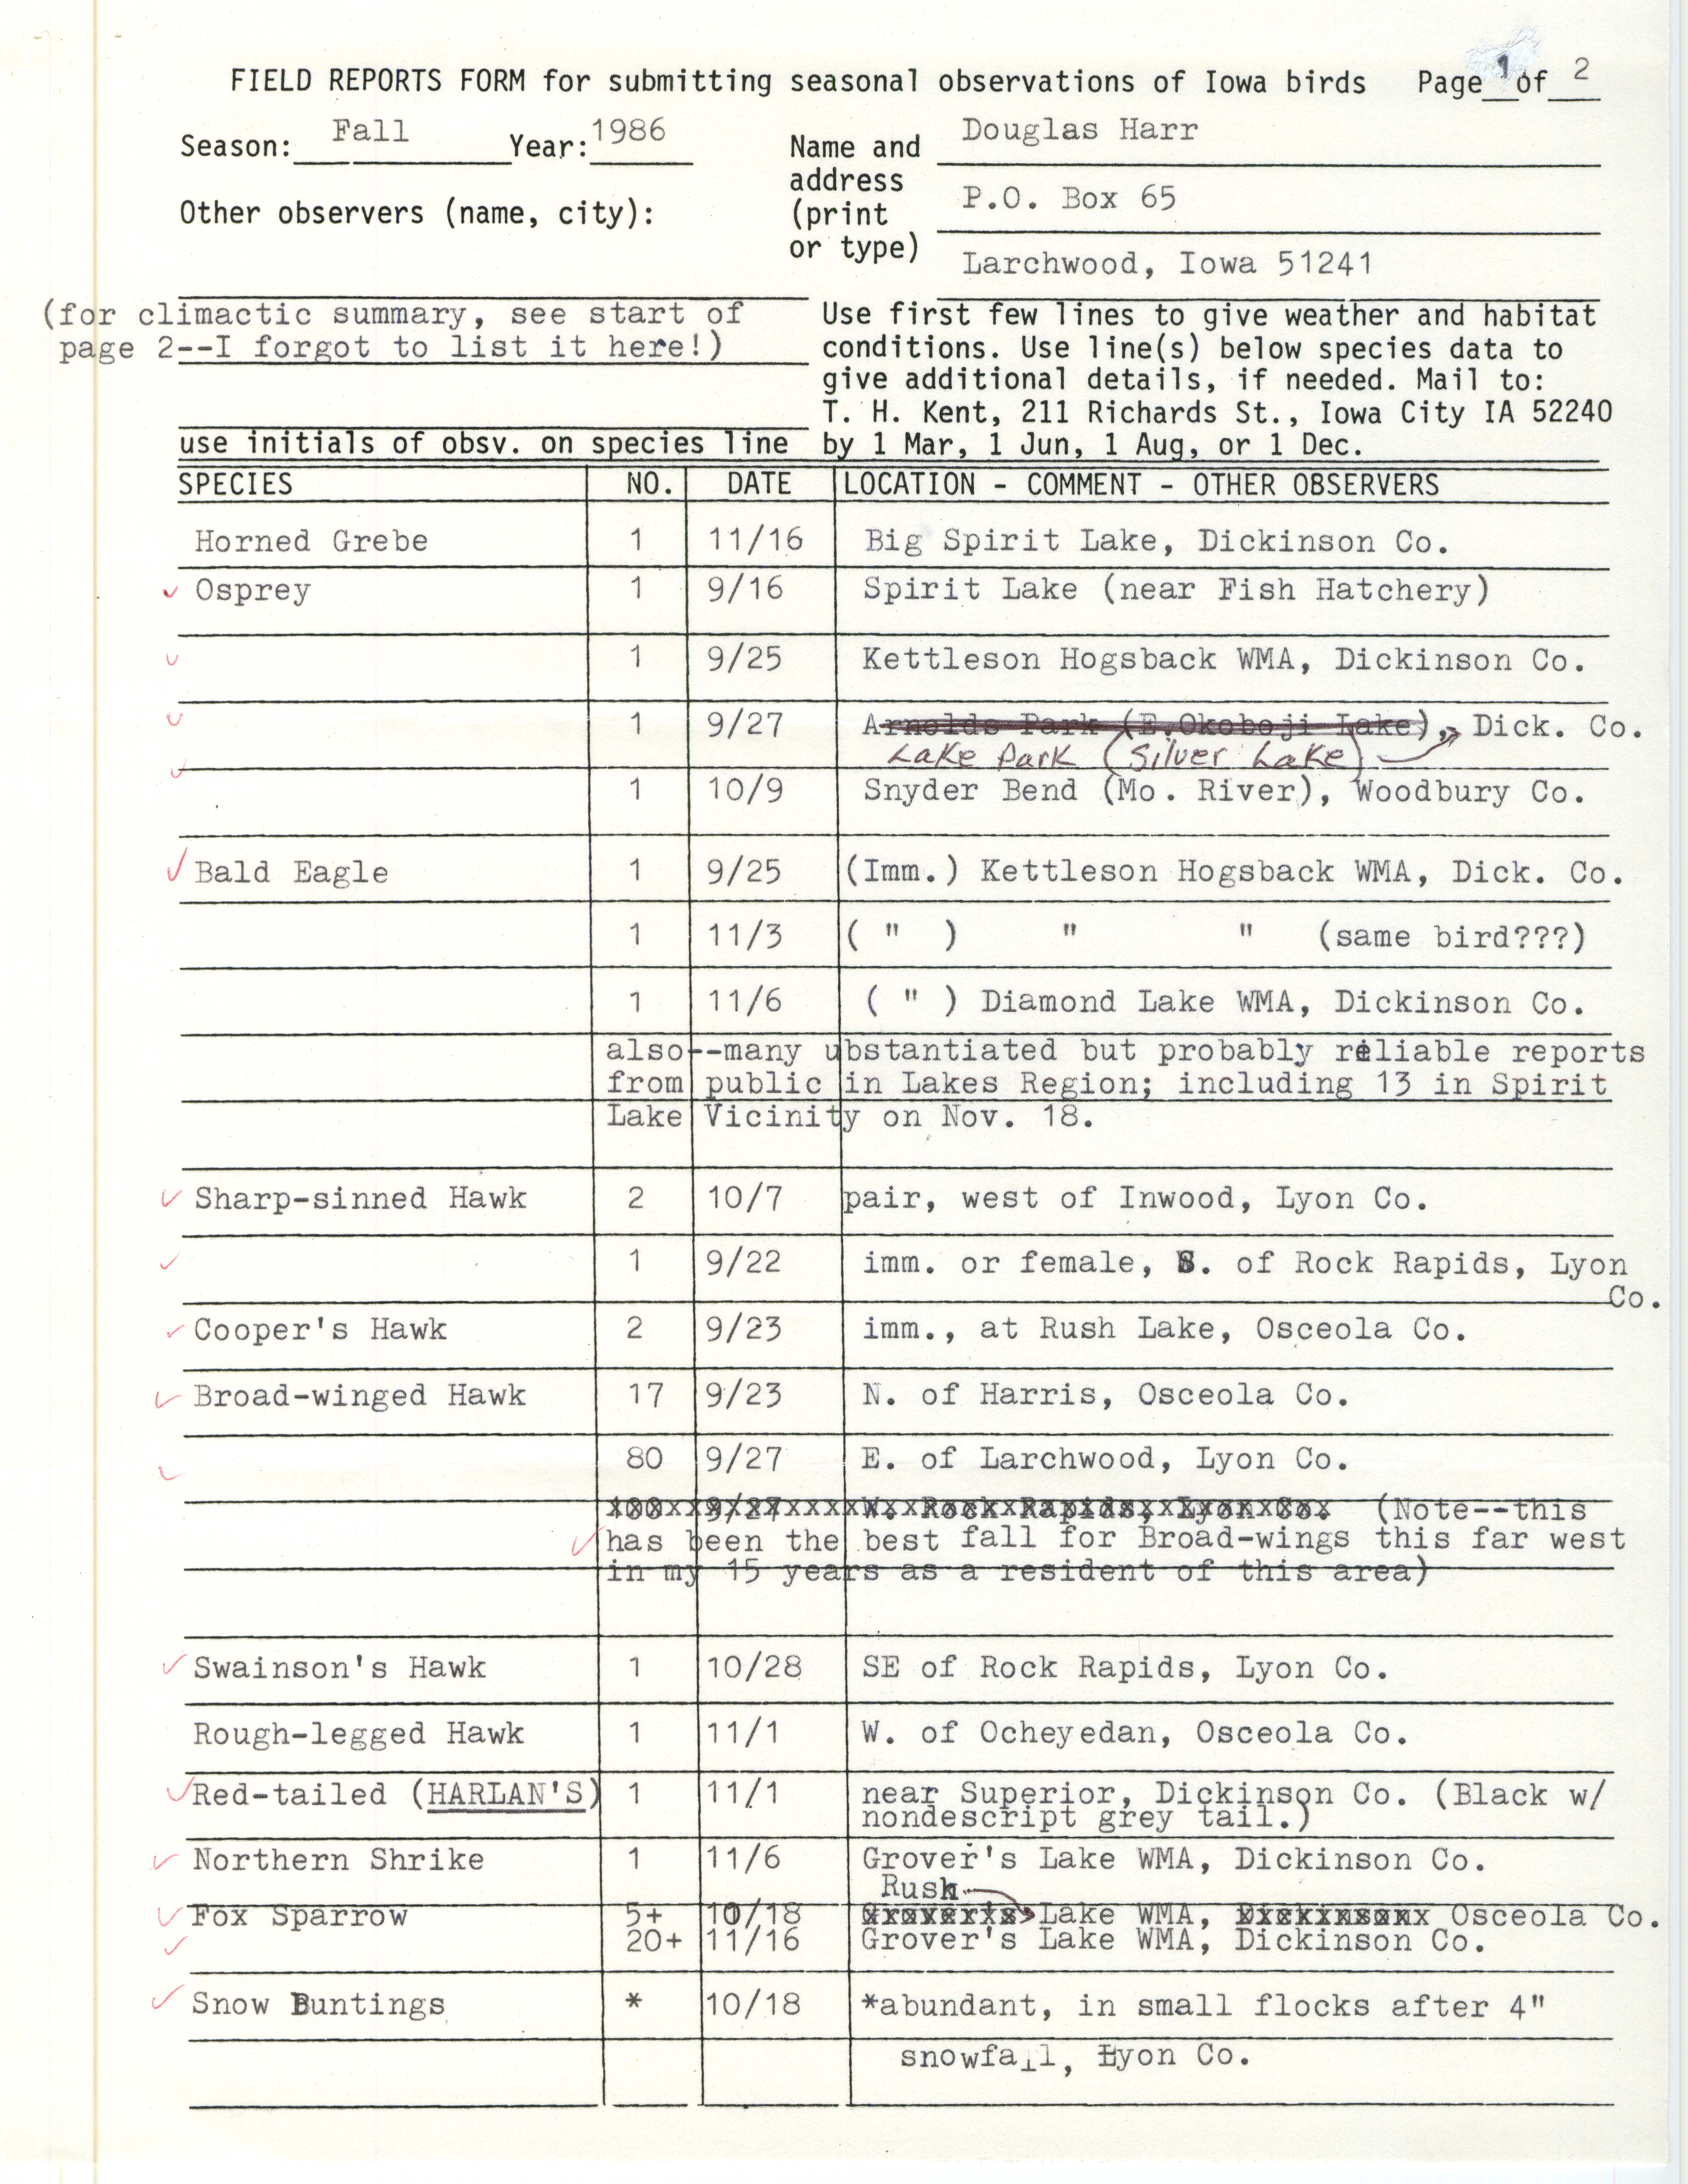 Field reports form, contributed by Douglas C. Harr, fall 1986